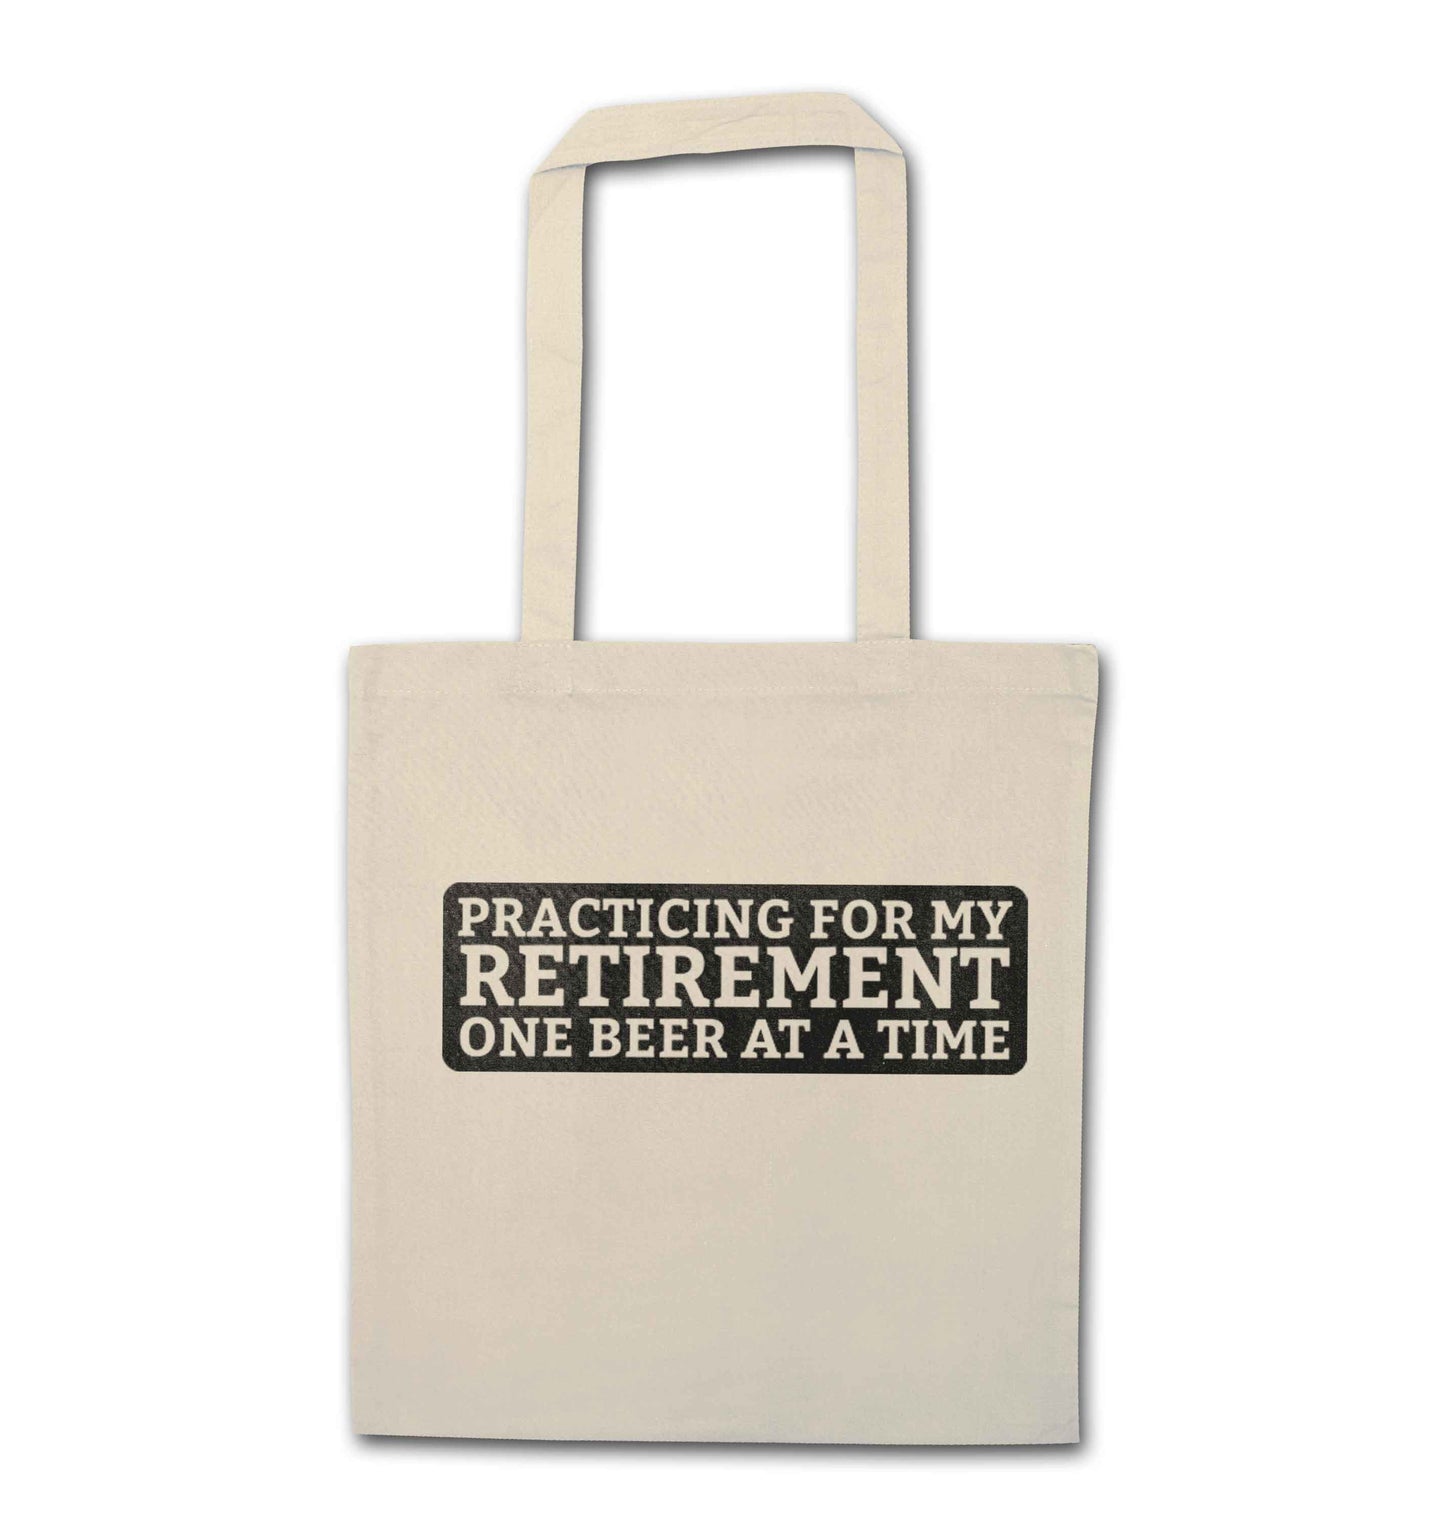 Practicing for my Retirement one Beer at a Time natural tote bag